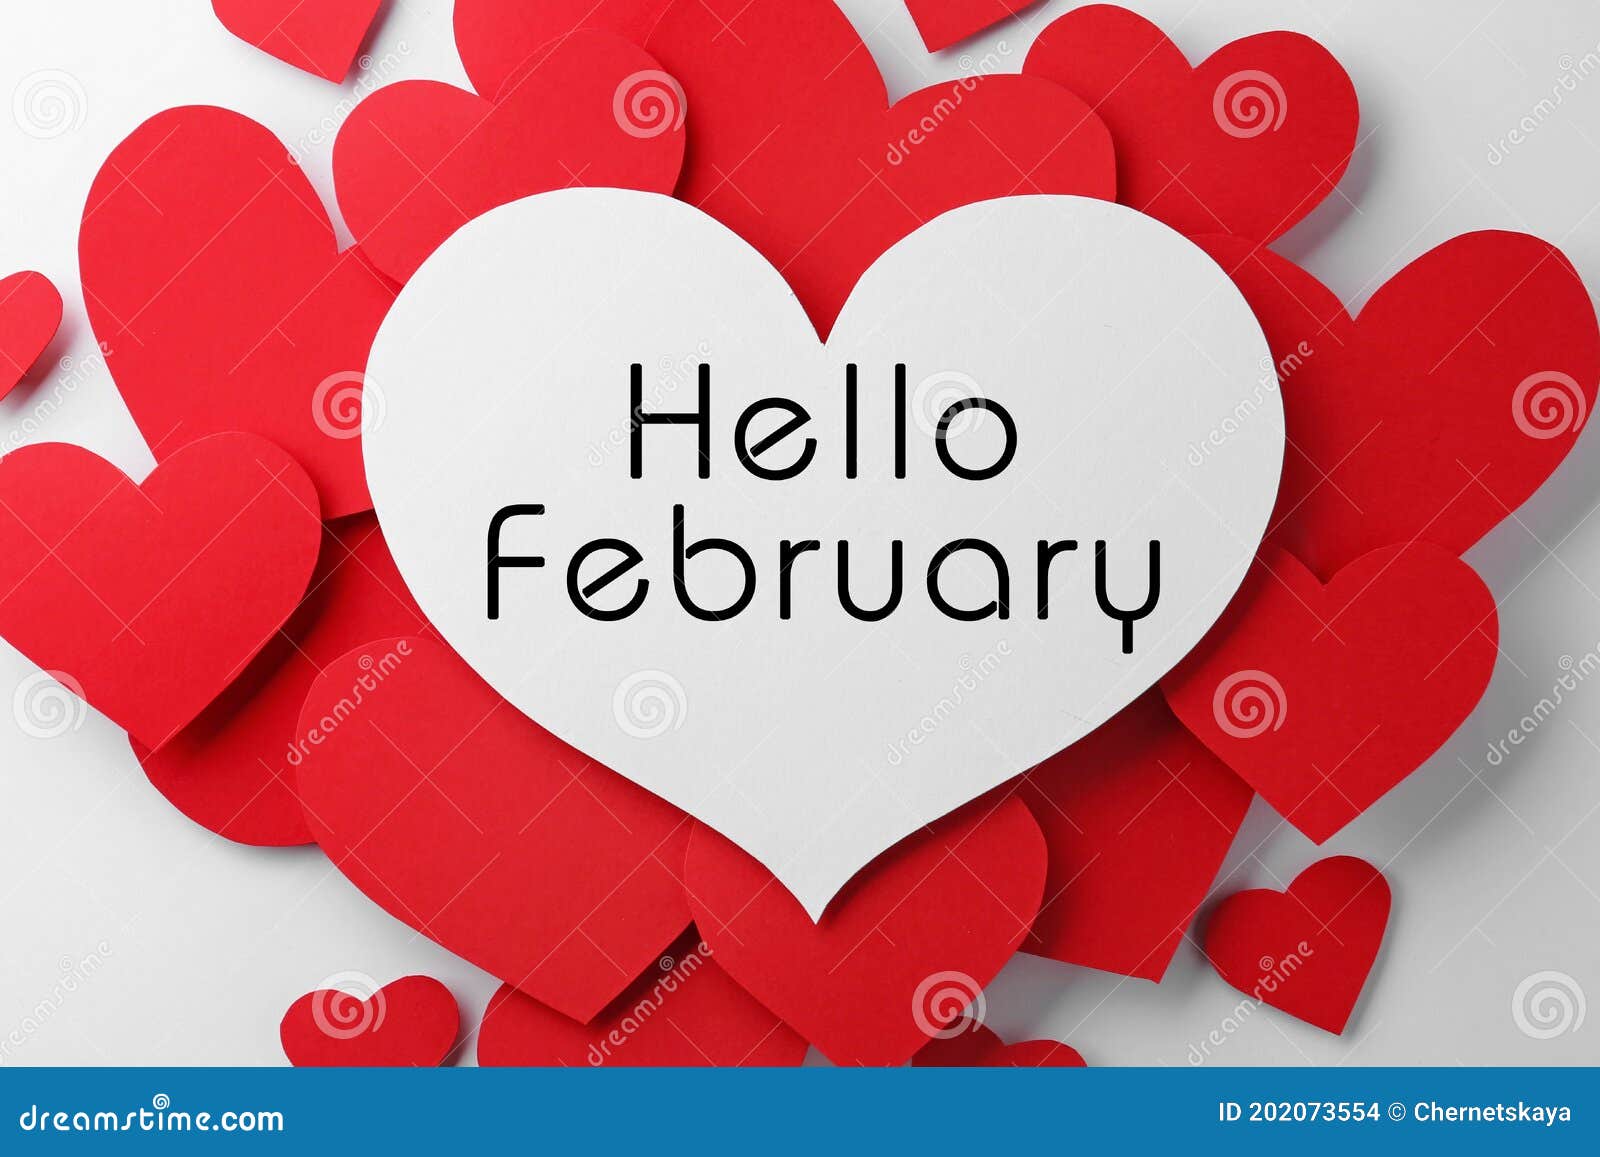 greeting card with text hello february. many red paper hearts and one with text on white background, flat lay